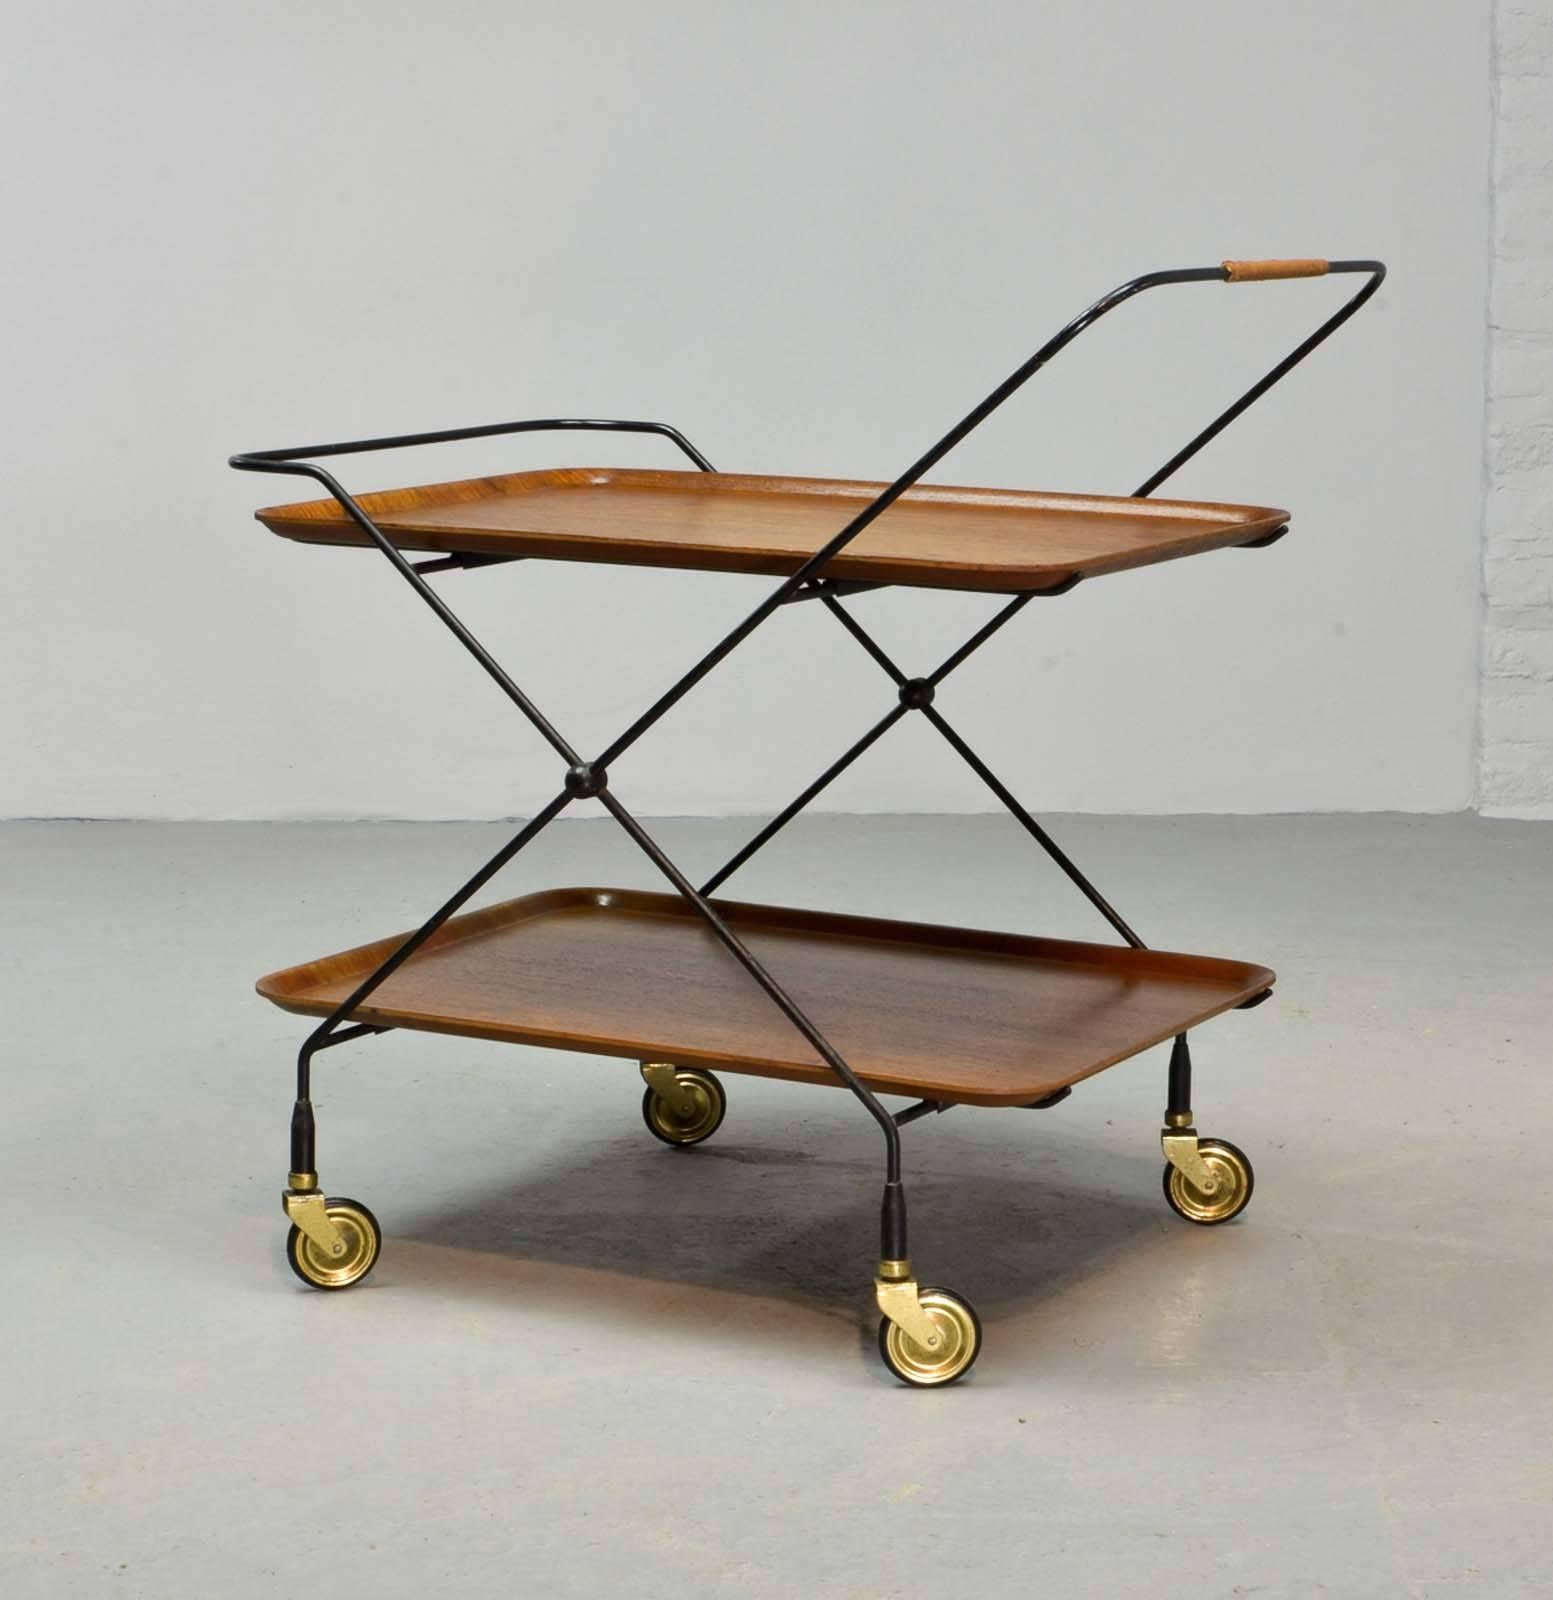 This beautiful foldable and mobile teak trolley on a minimalistic steel base, was designed by Paul Nagel, Germany in the 1950s. Nice details are the strapped leather handgrip leather and the elegant brass wheels. Fits very well in a minimalistic